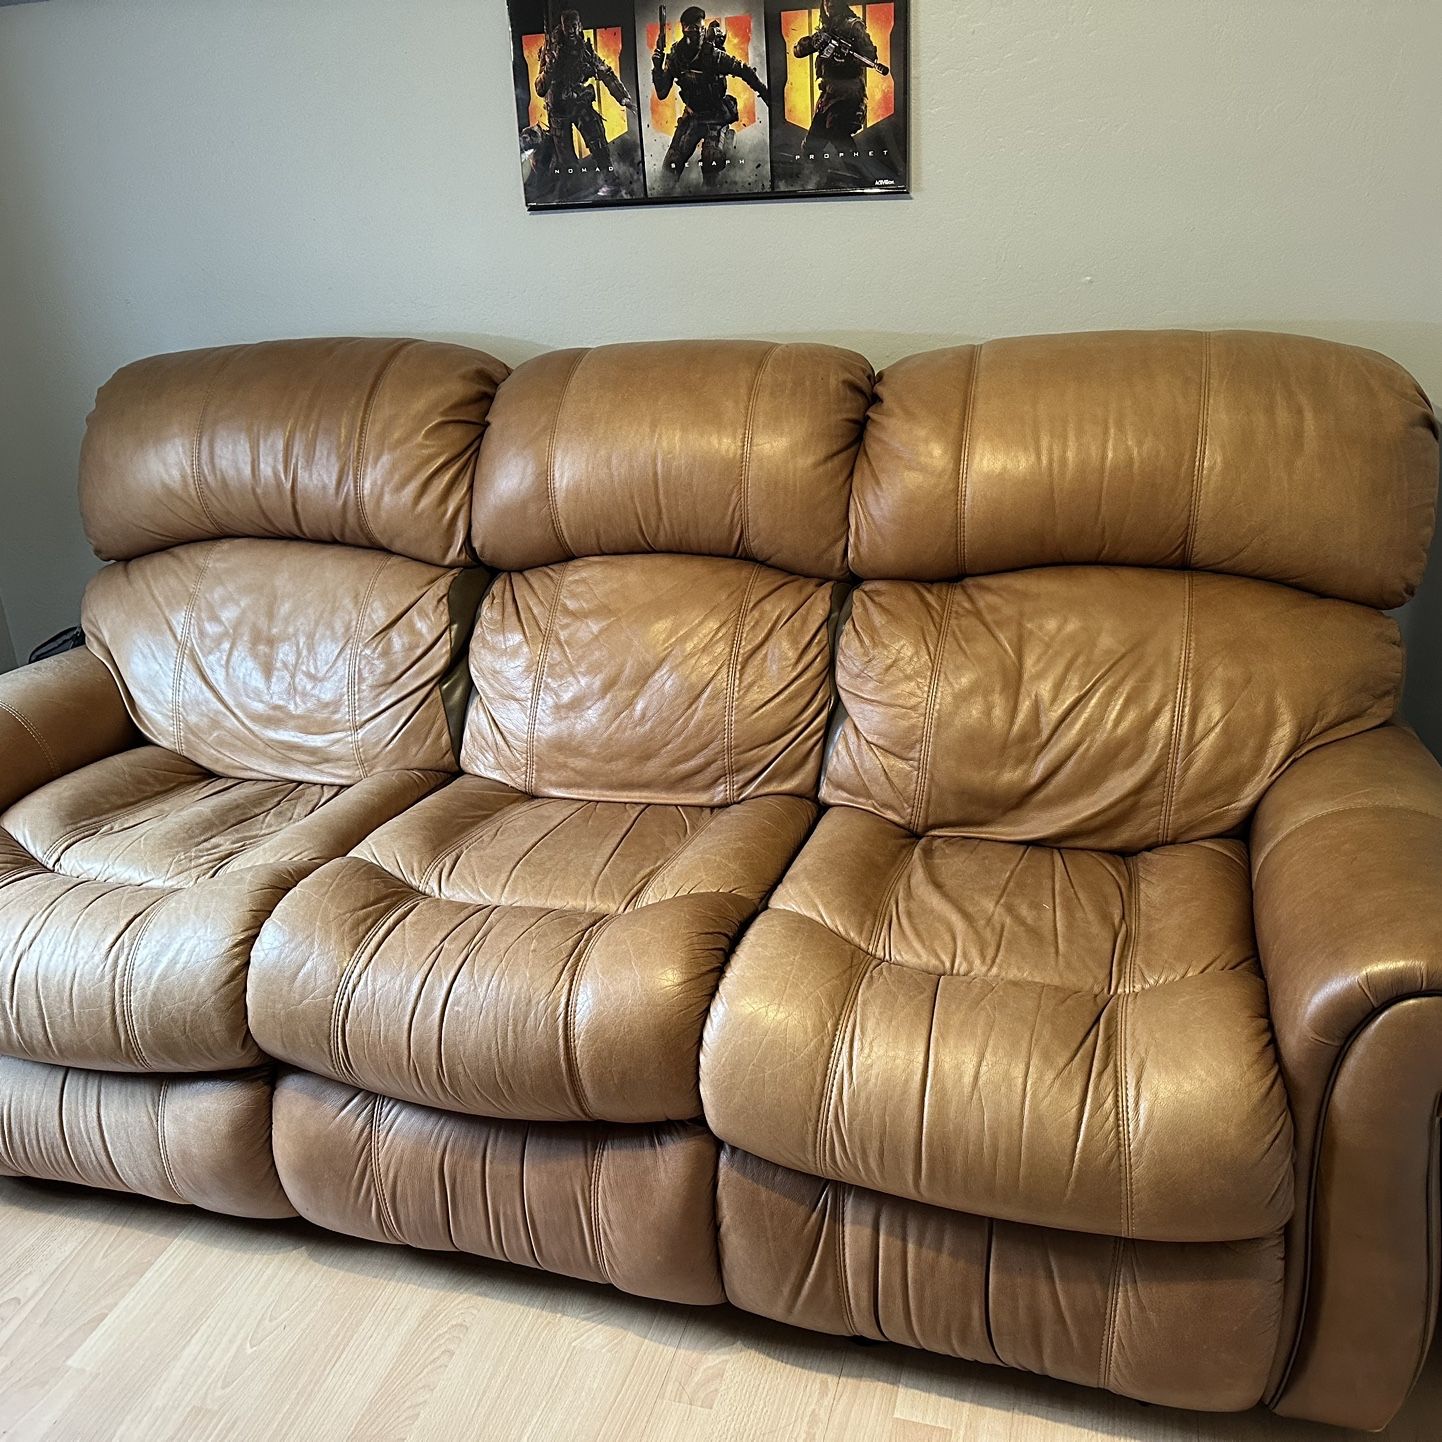 Great Looking, Super Comfortable Reclining Leather Couch